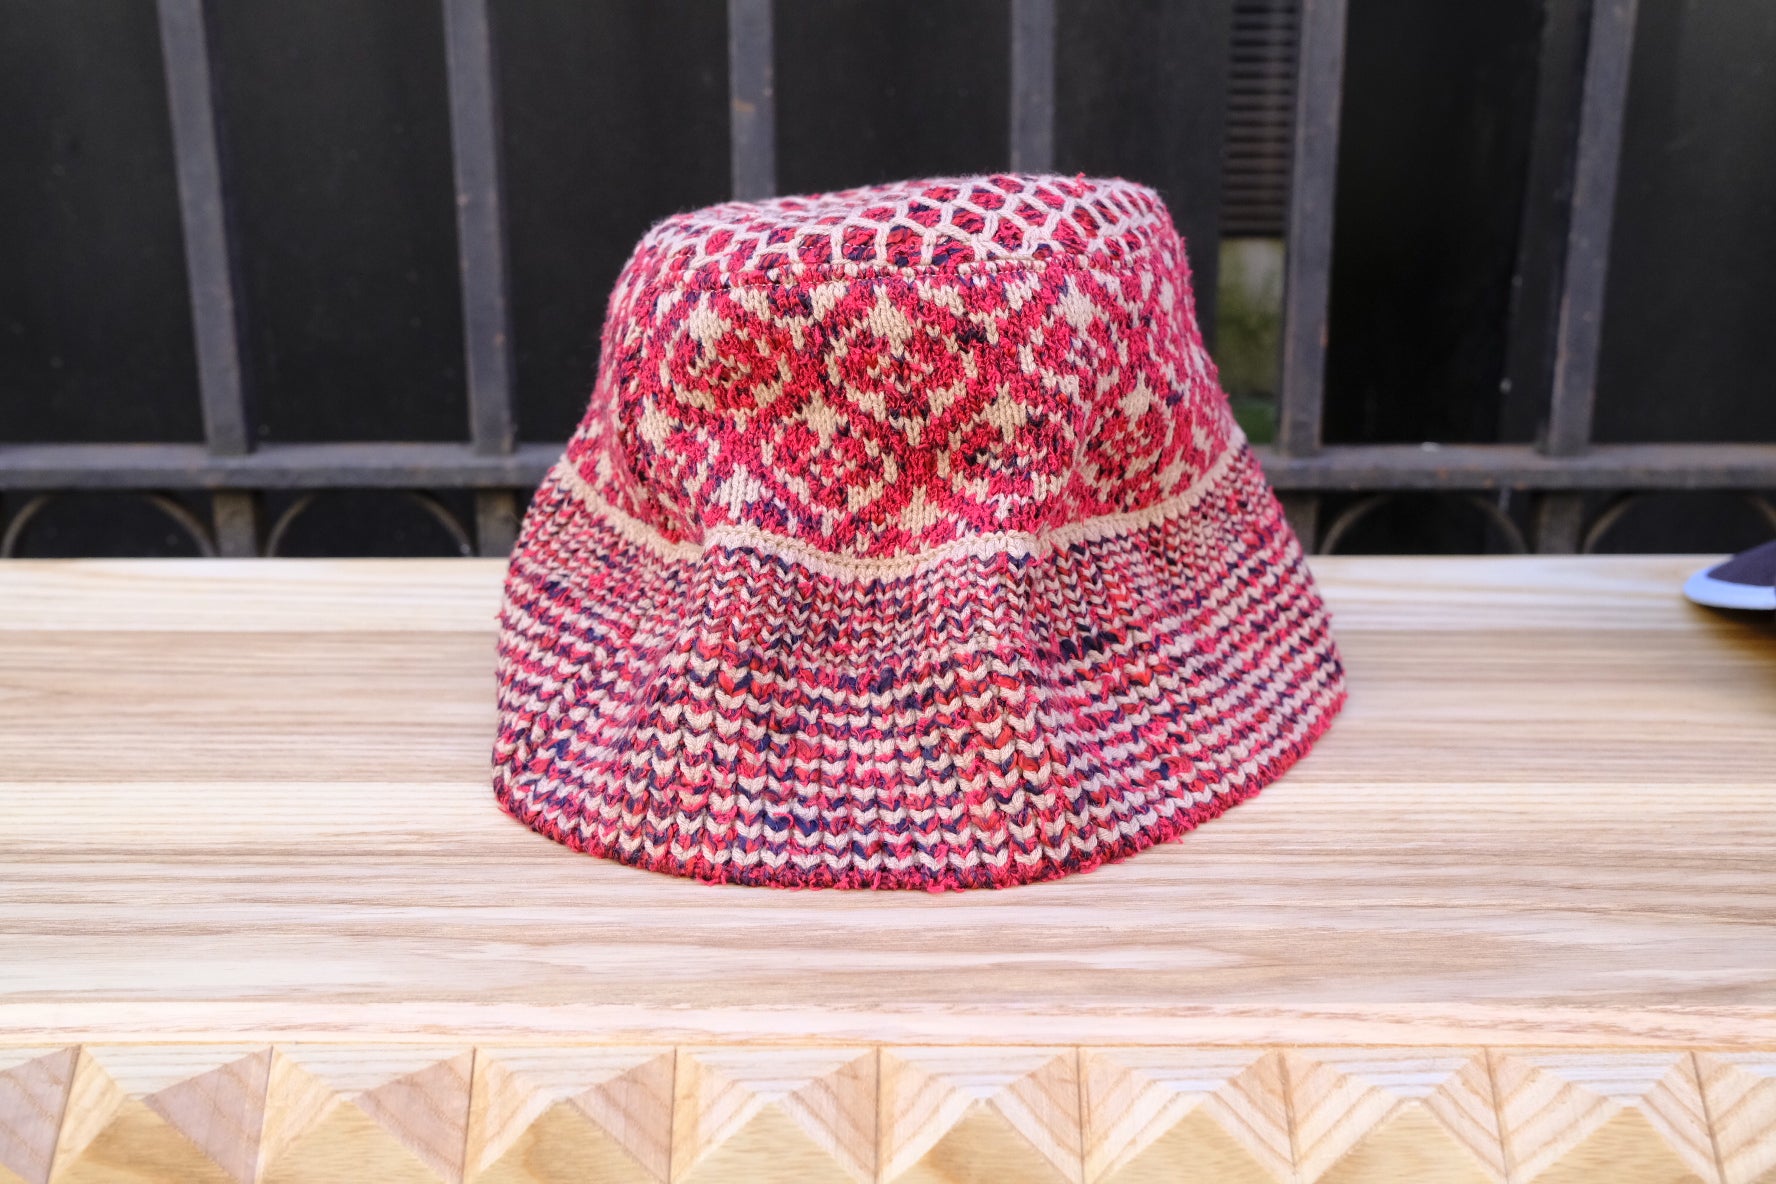 jacquard knit hat in red